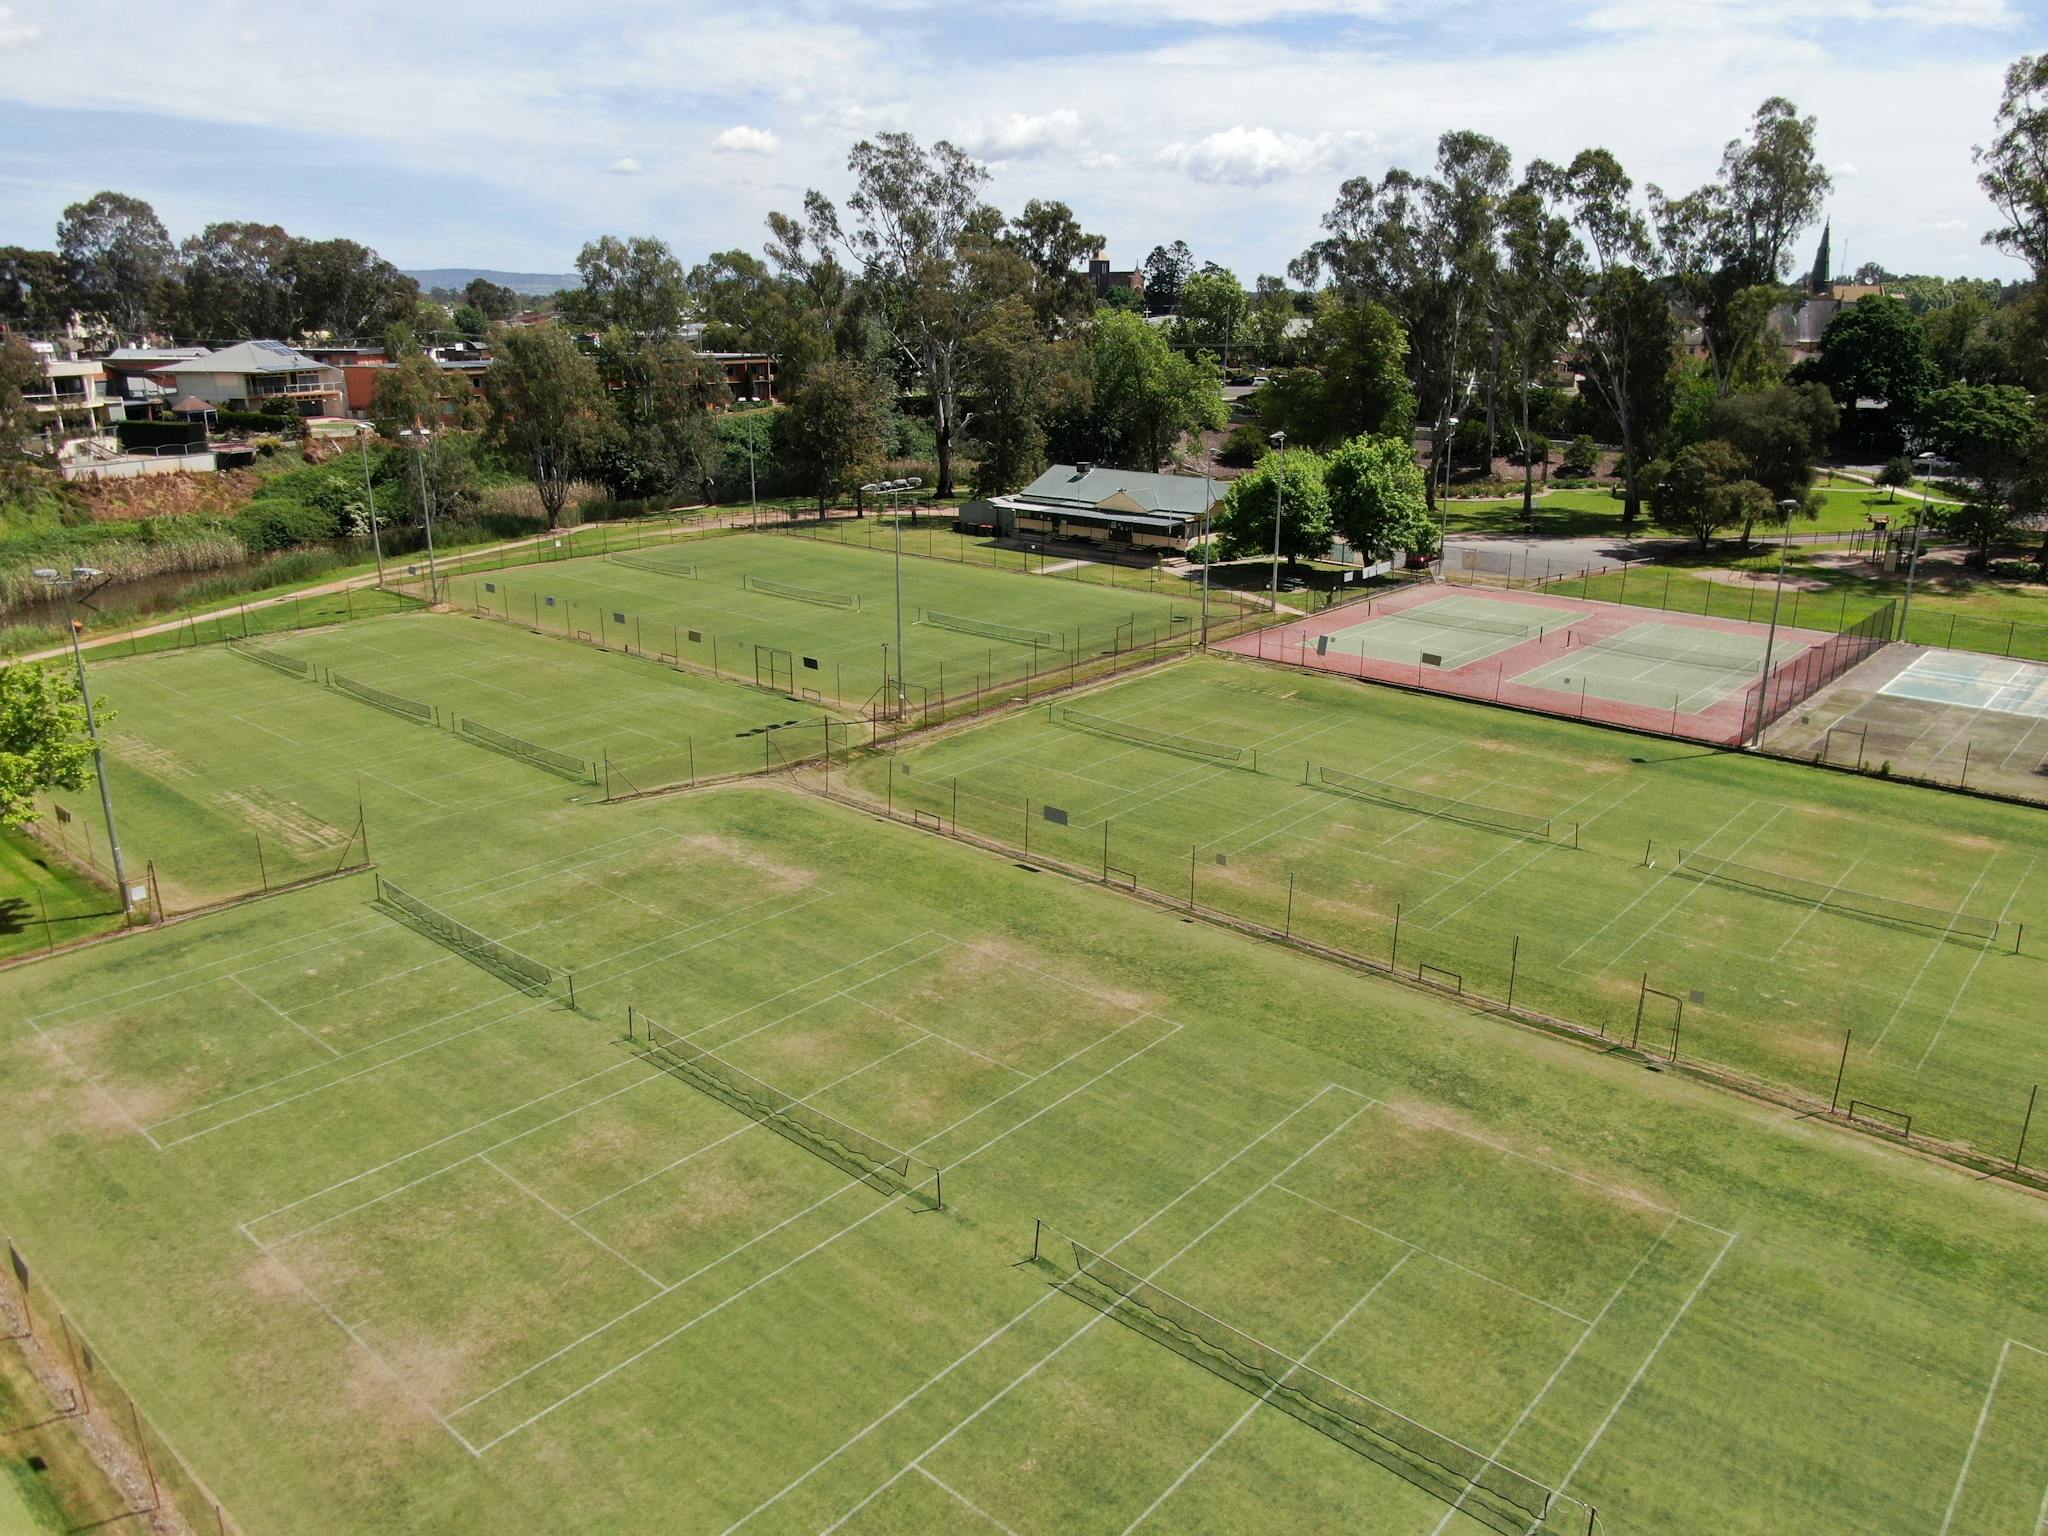 Aerial view of tennis courts, looking towards clubhouse, houses in distance, trees, sunny day.